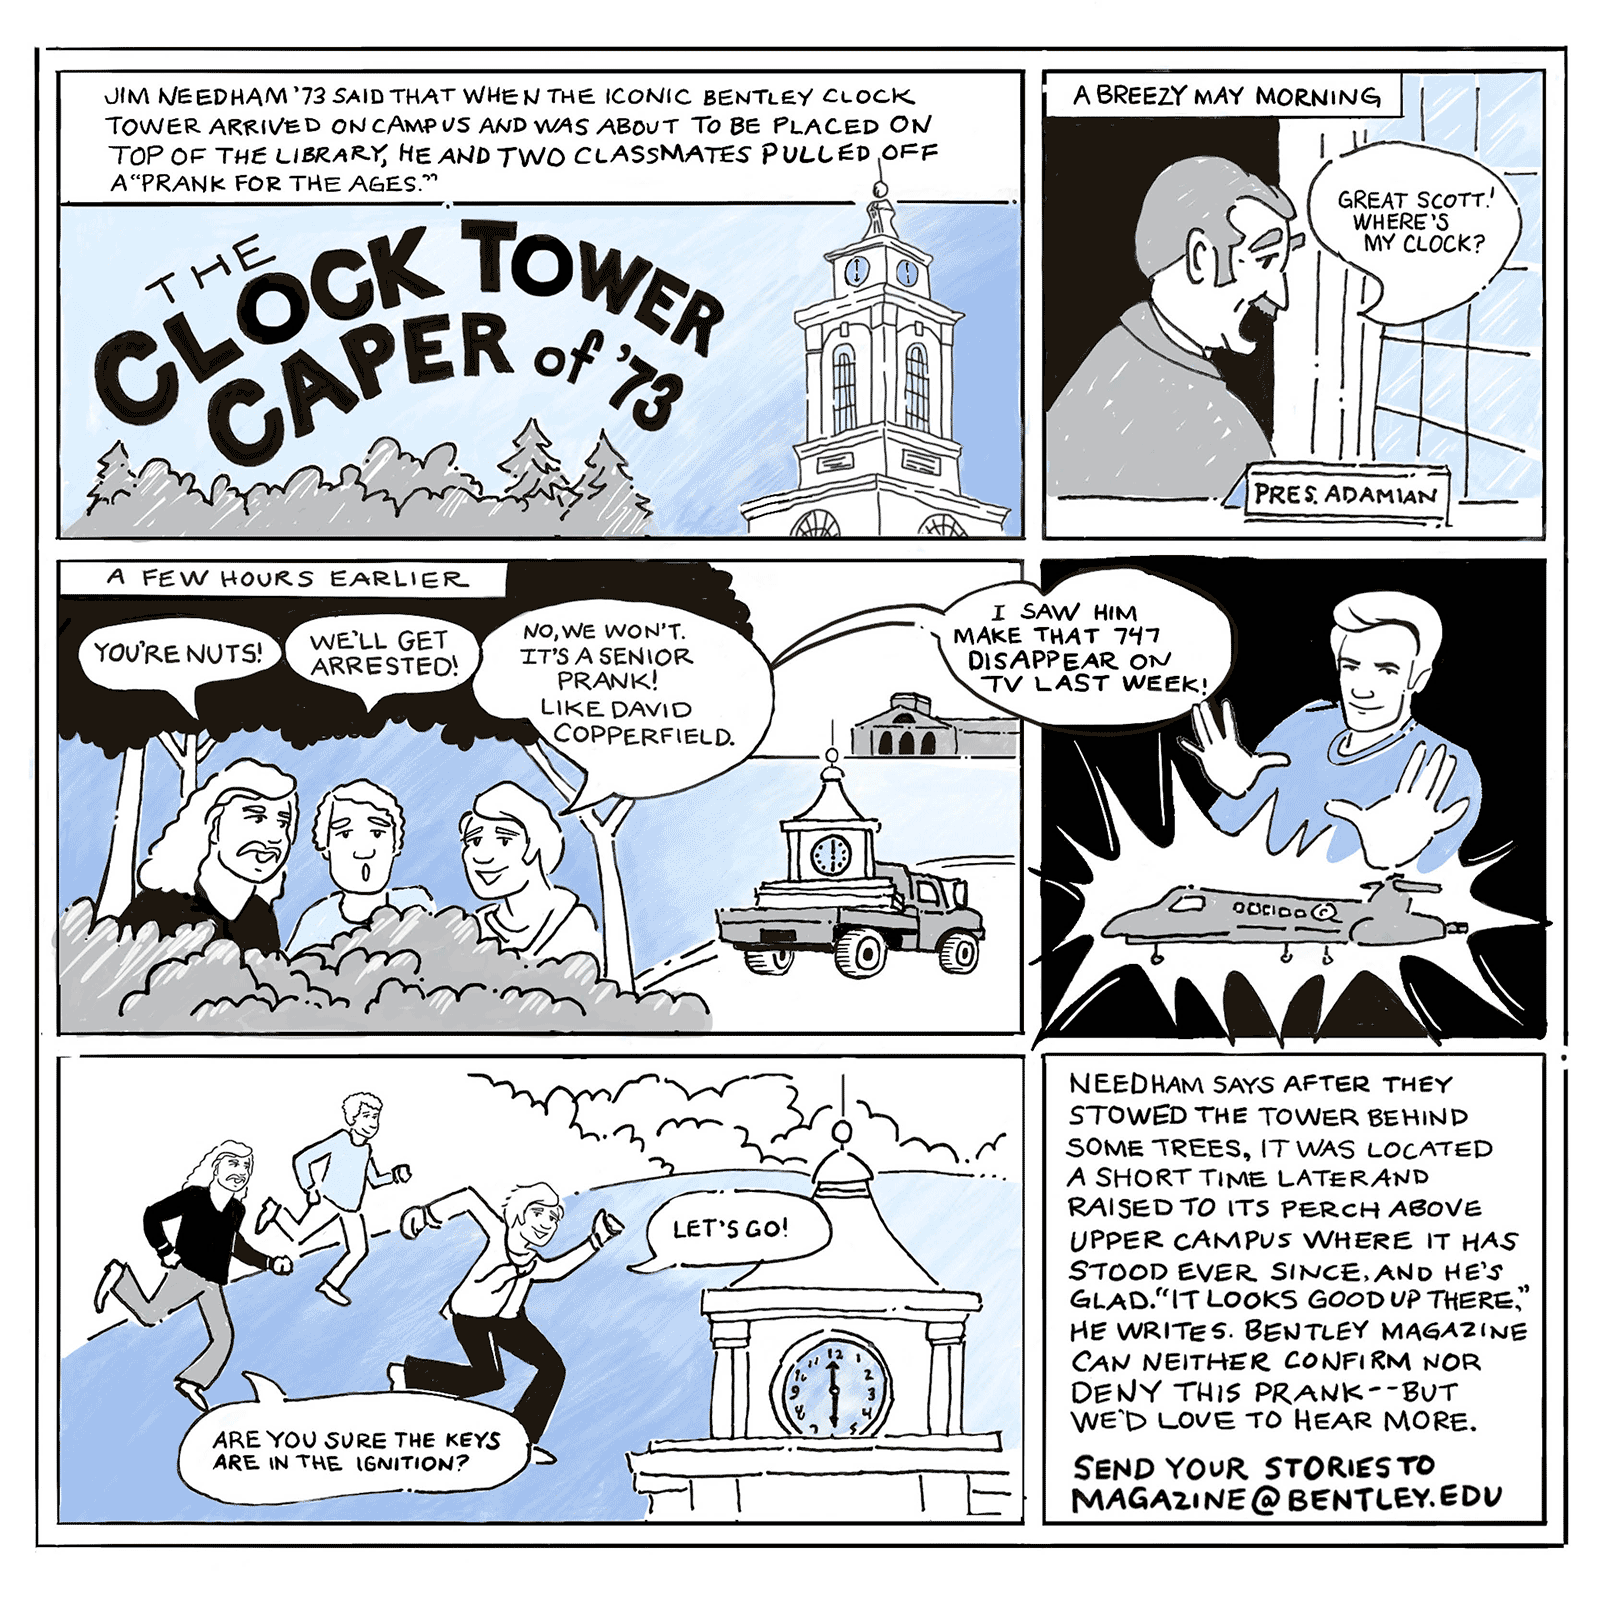 an illustrated comic titled The Clock Tower Caper of ’73